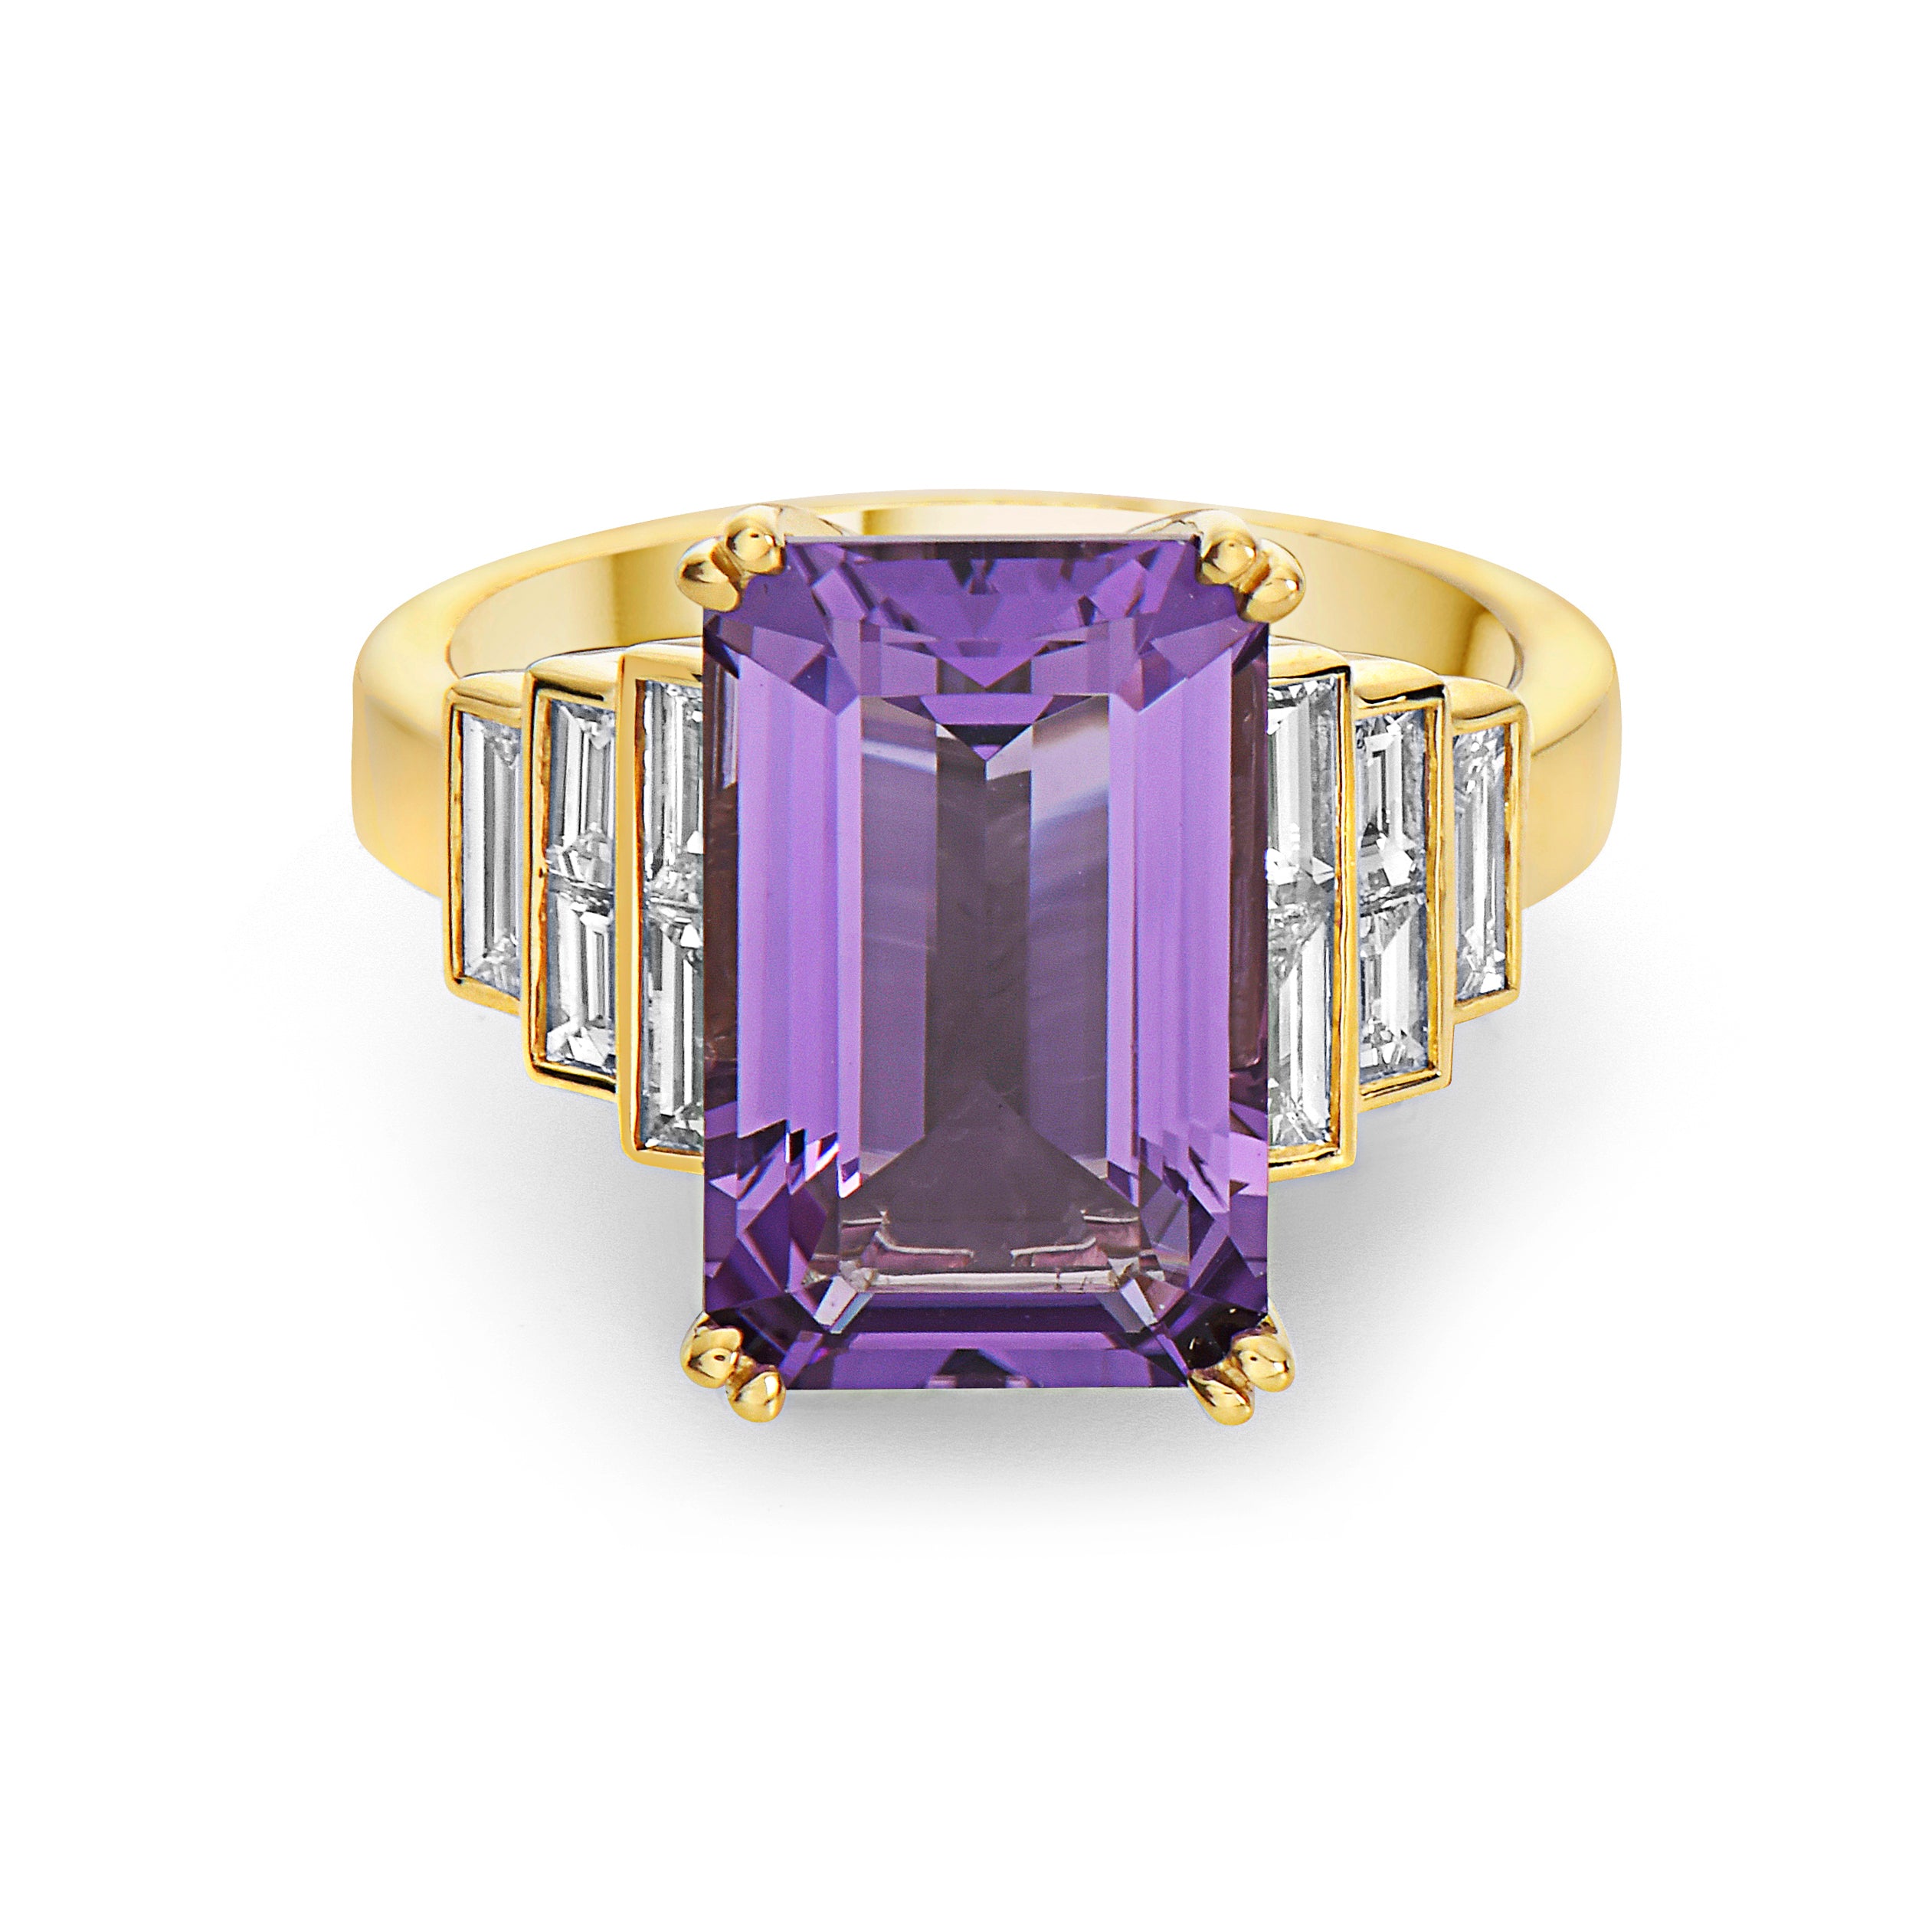 Emerald Cut Amethyst Ring with Baguette Sides